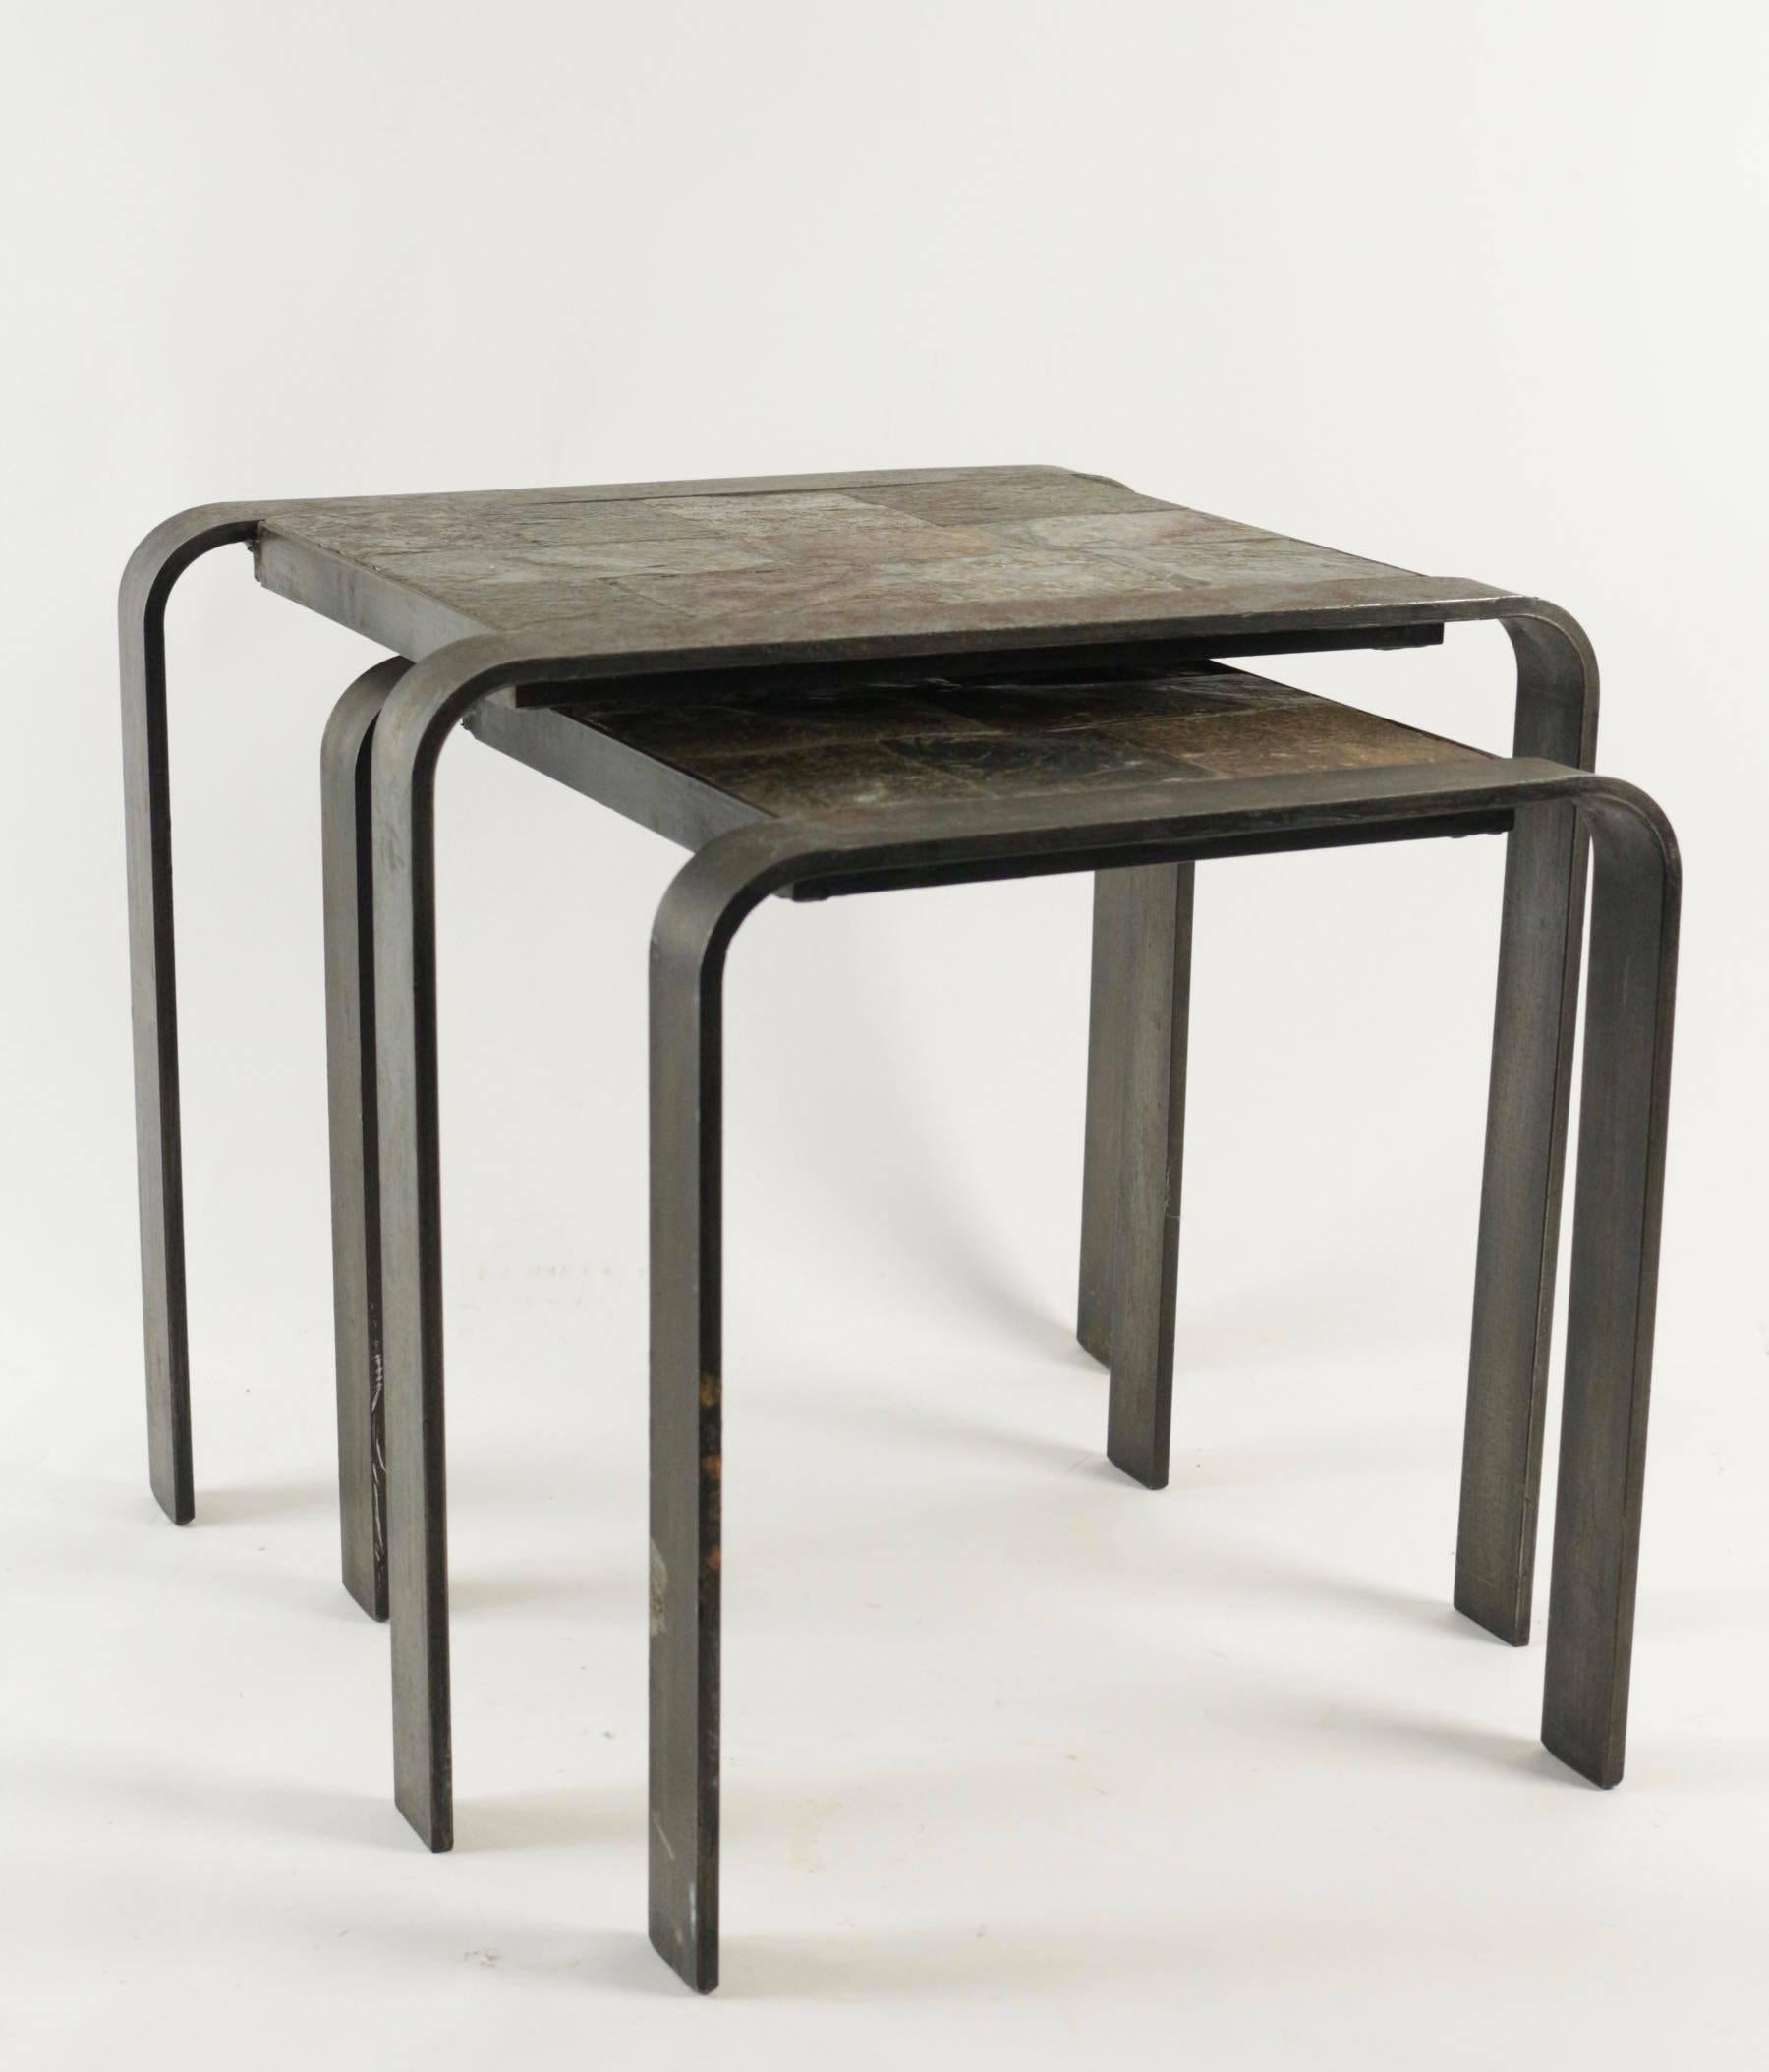 Mid-20th Century Nesting Tables of the 1960s-1970s in Wrought Iron and Slate